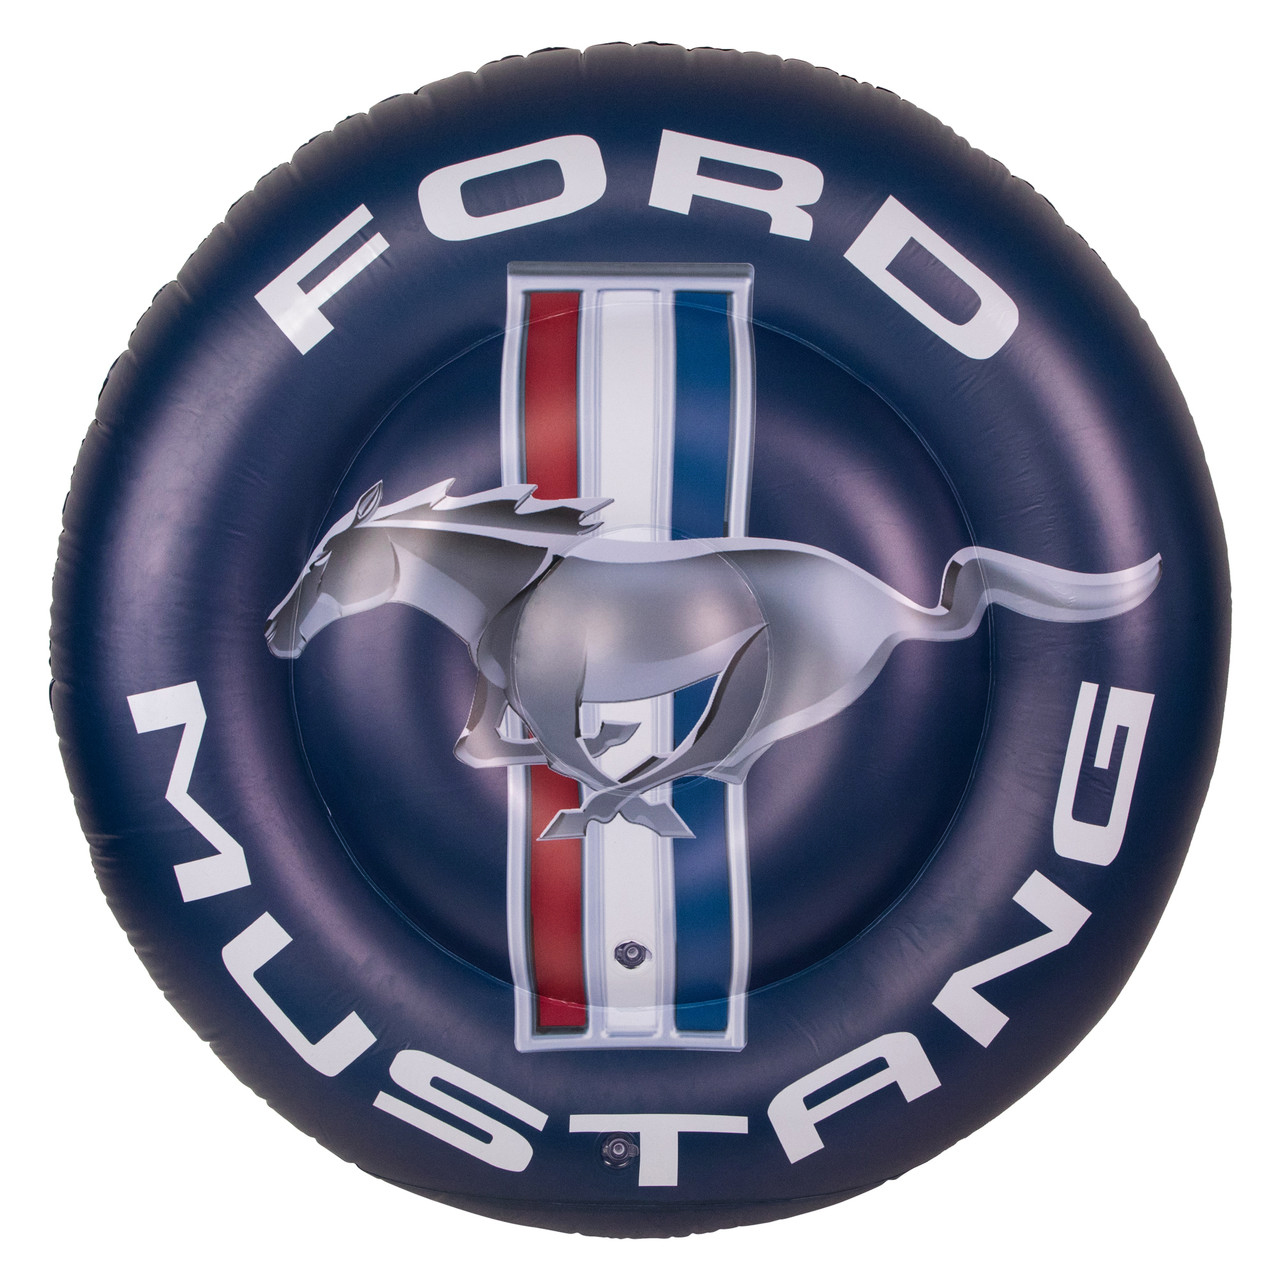 46 inch round Ford Mustang pool float